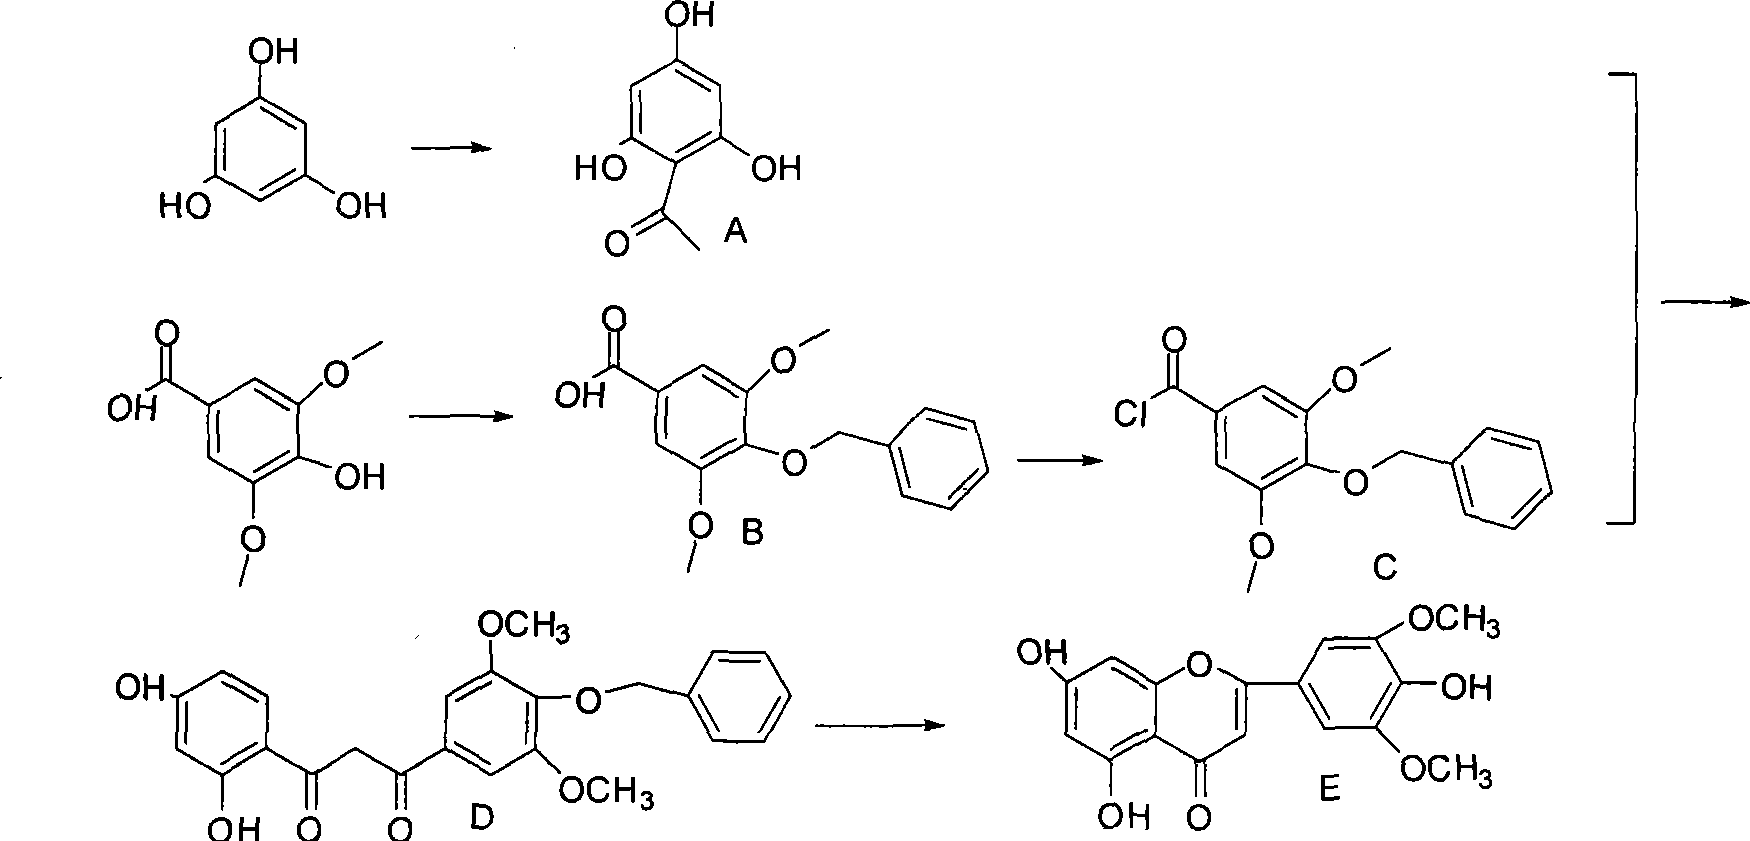 Synthesis method and application of 5,7,4'-trihydroxy-3',5'-dimethoxyflavone